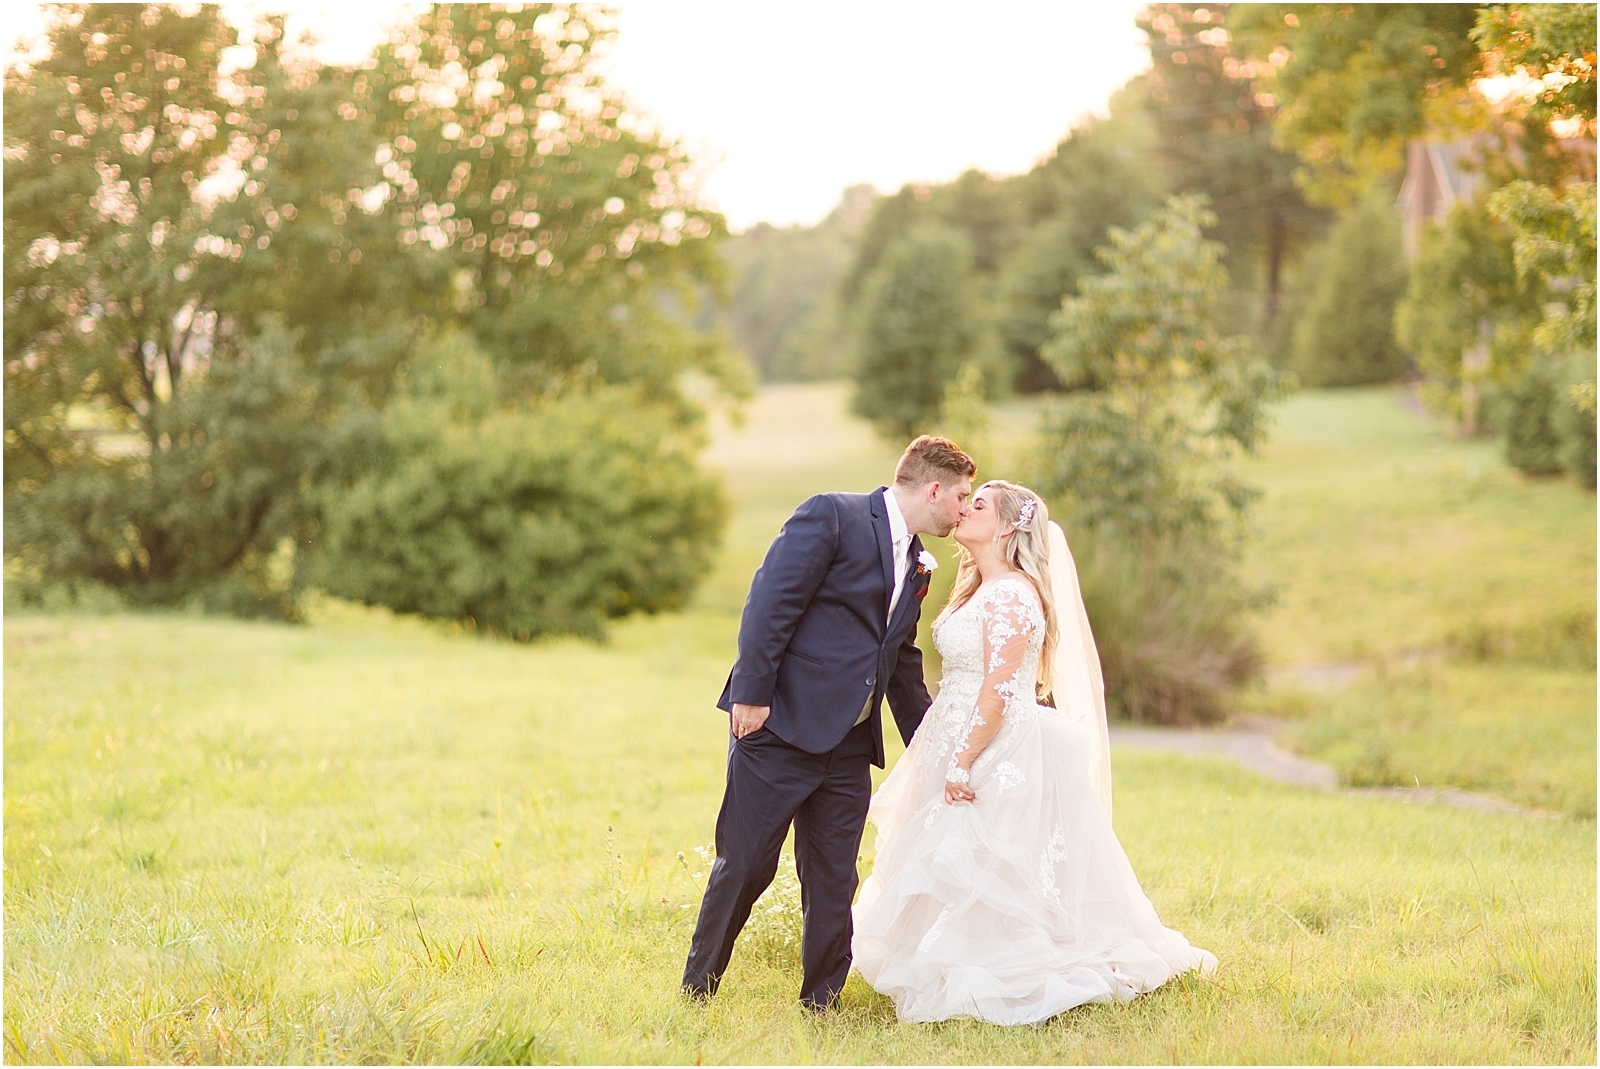 Kayla and Colten | Bret and Brandie Photography0125.jpg